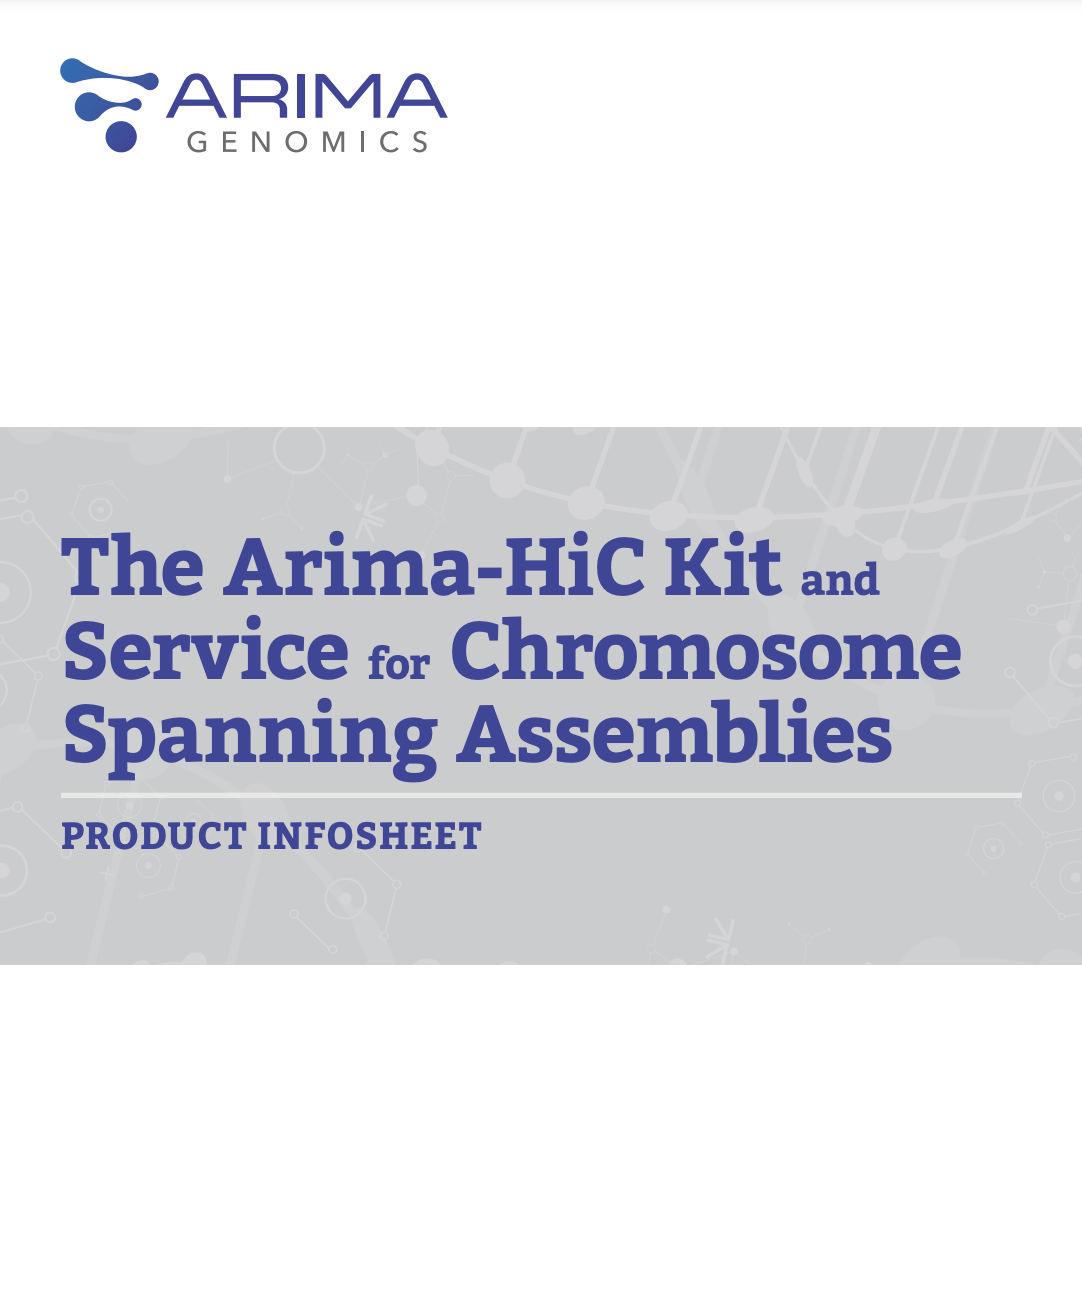 Genome Assembly Product Datasheet